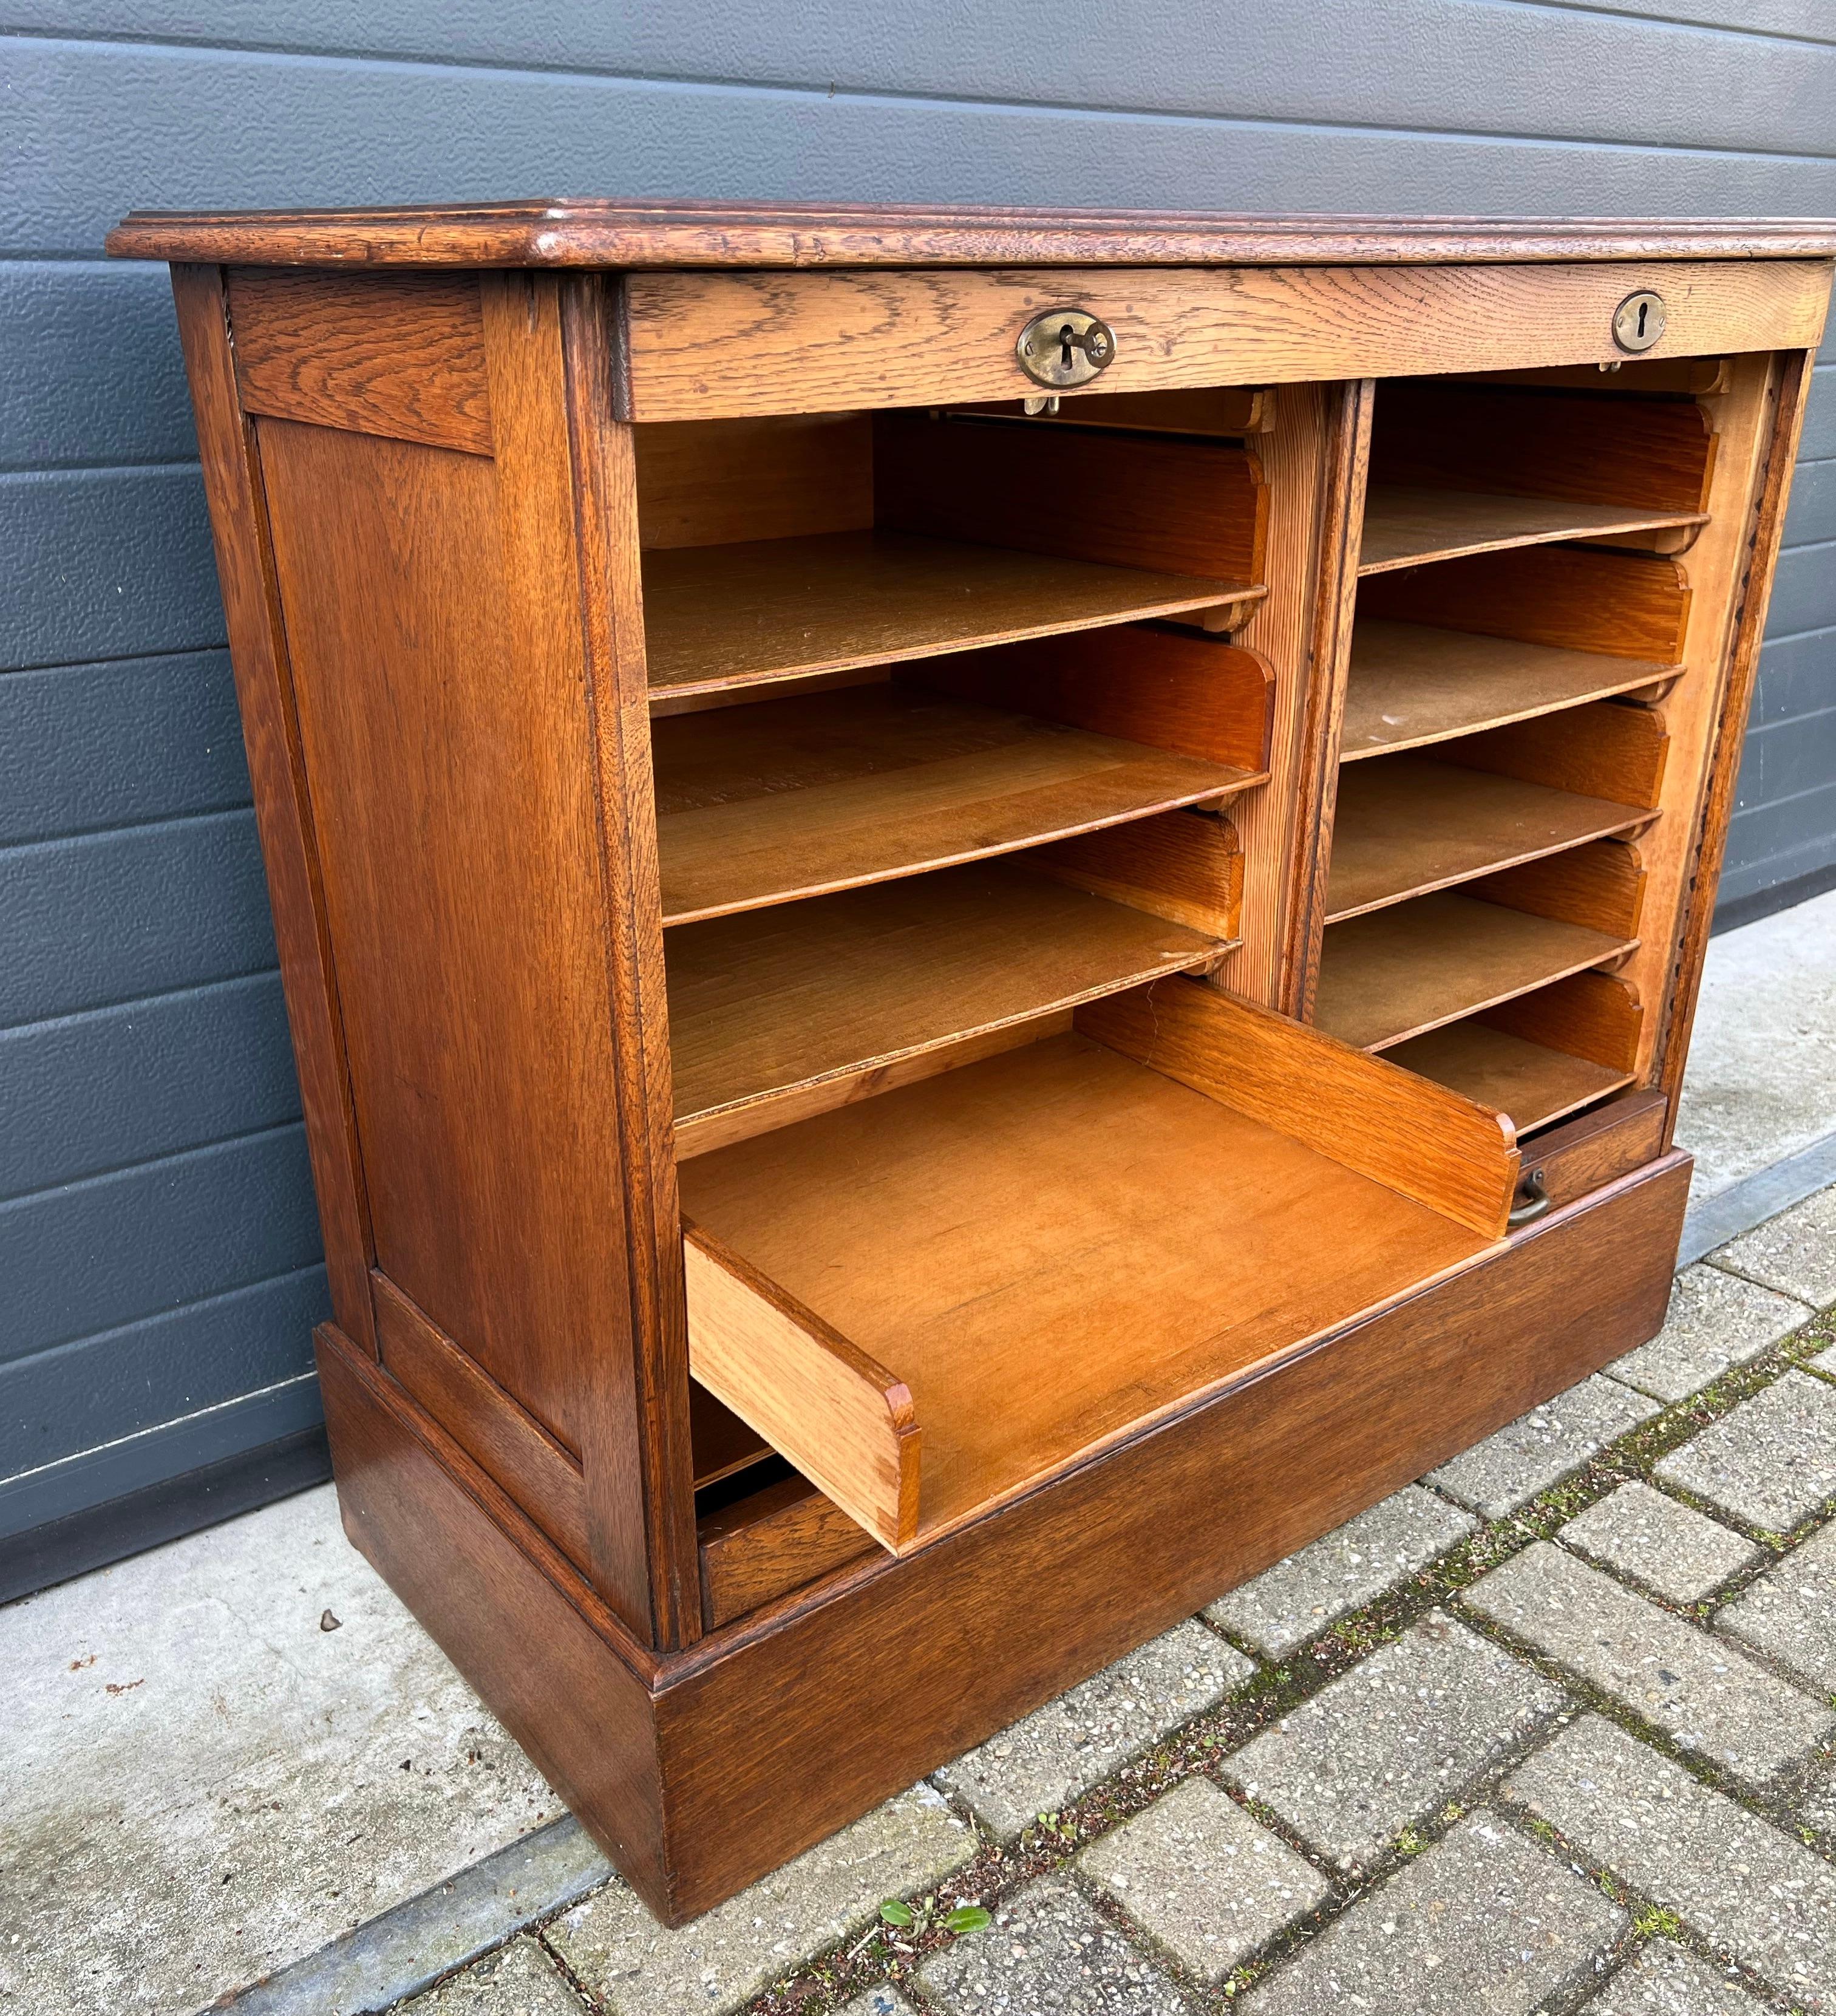 20th Century Practical Dutch Arts & Crafts Filing Cabinet with Double Roller Door and Drawers